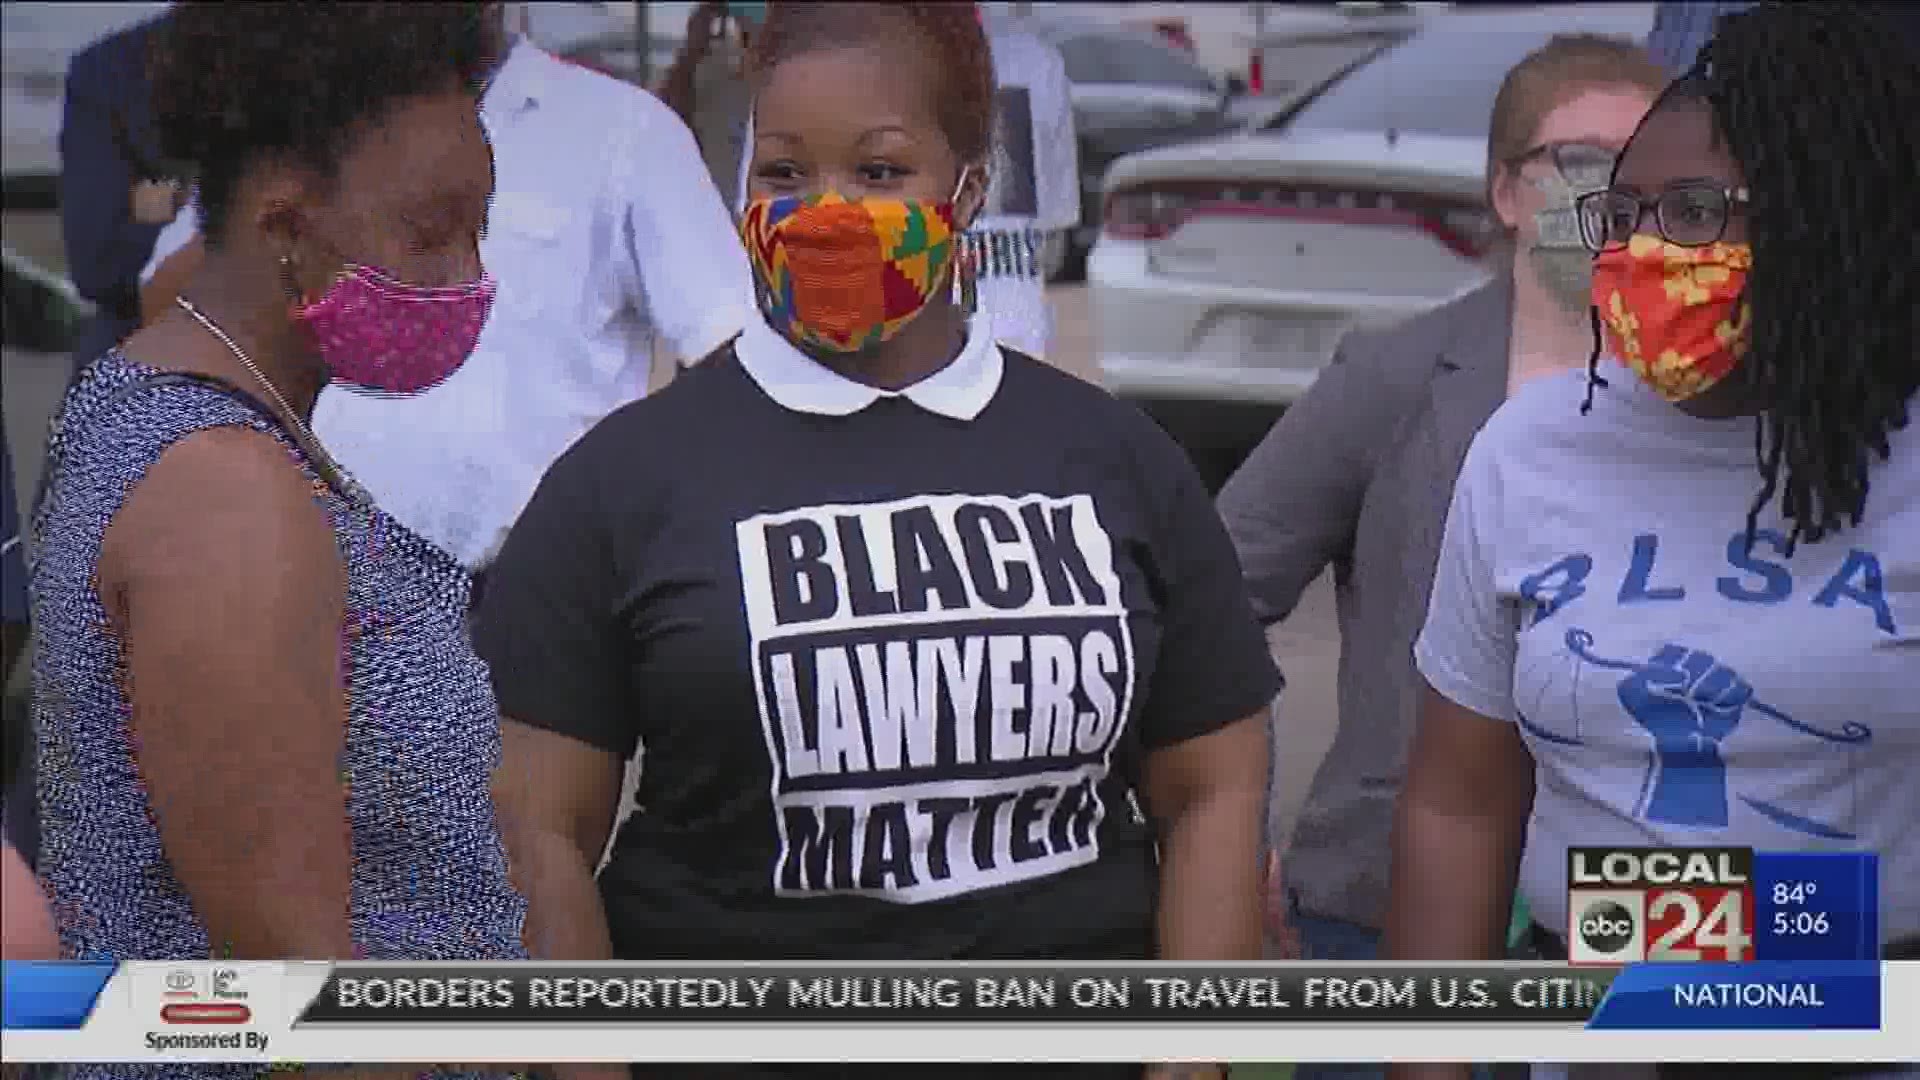 Memphis bar associations held a march Wednesday to recognize racism in the legal system and community